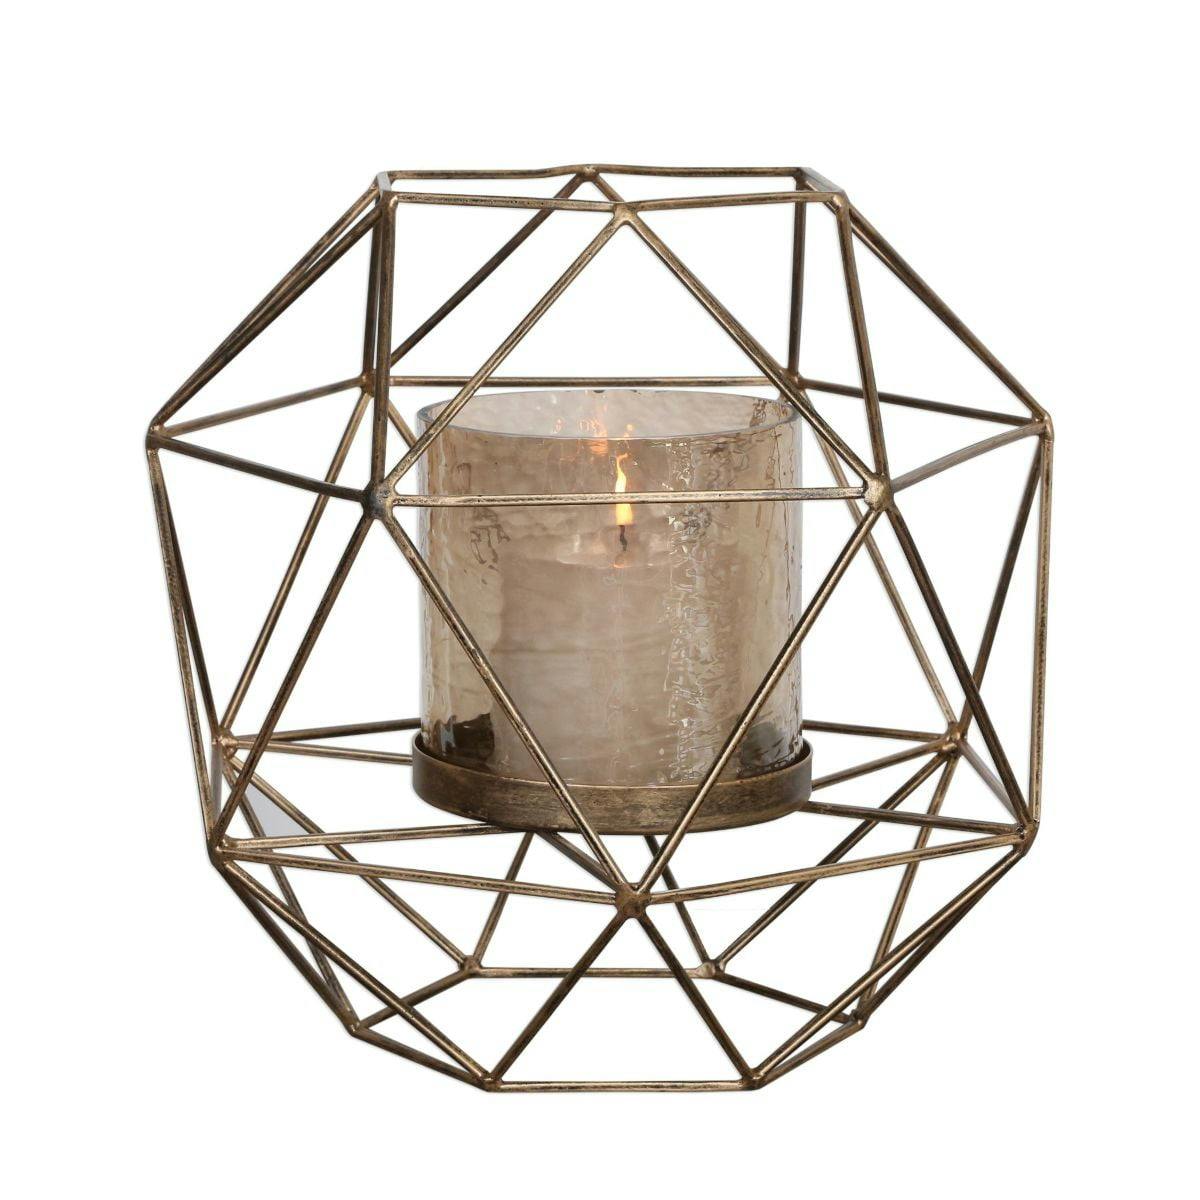 Contemporary Geometric Gold Iron Candleholder with Copper Accents